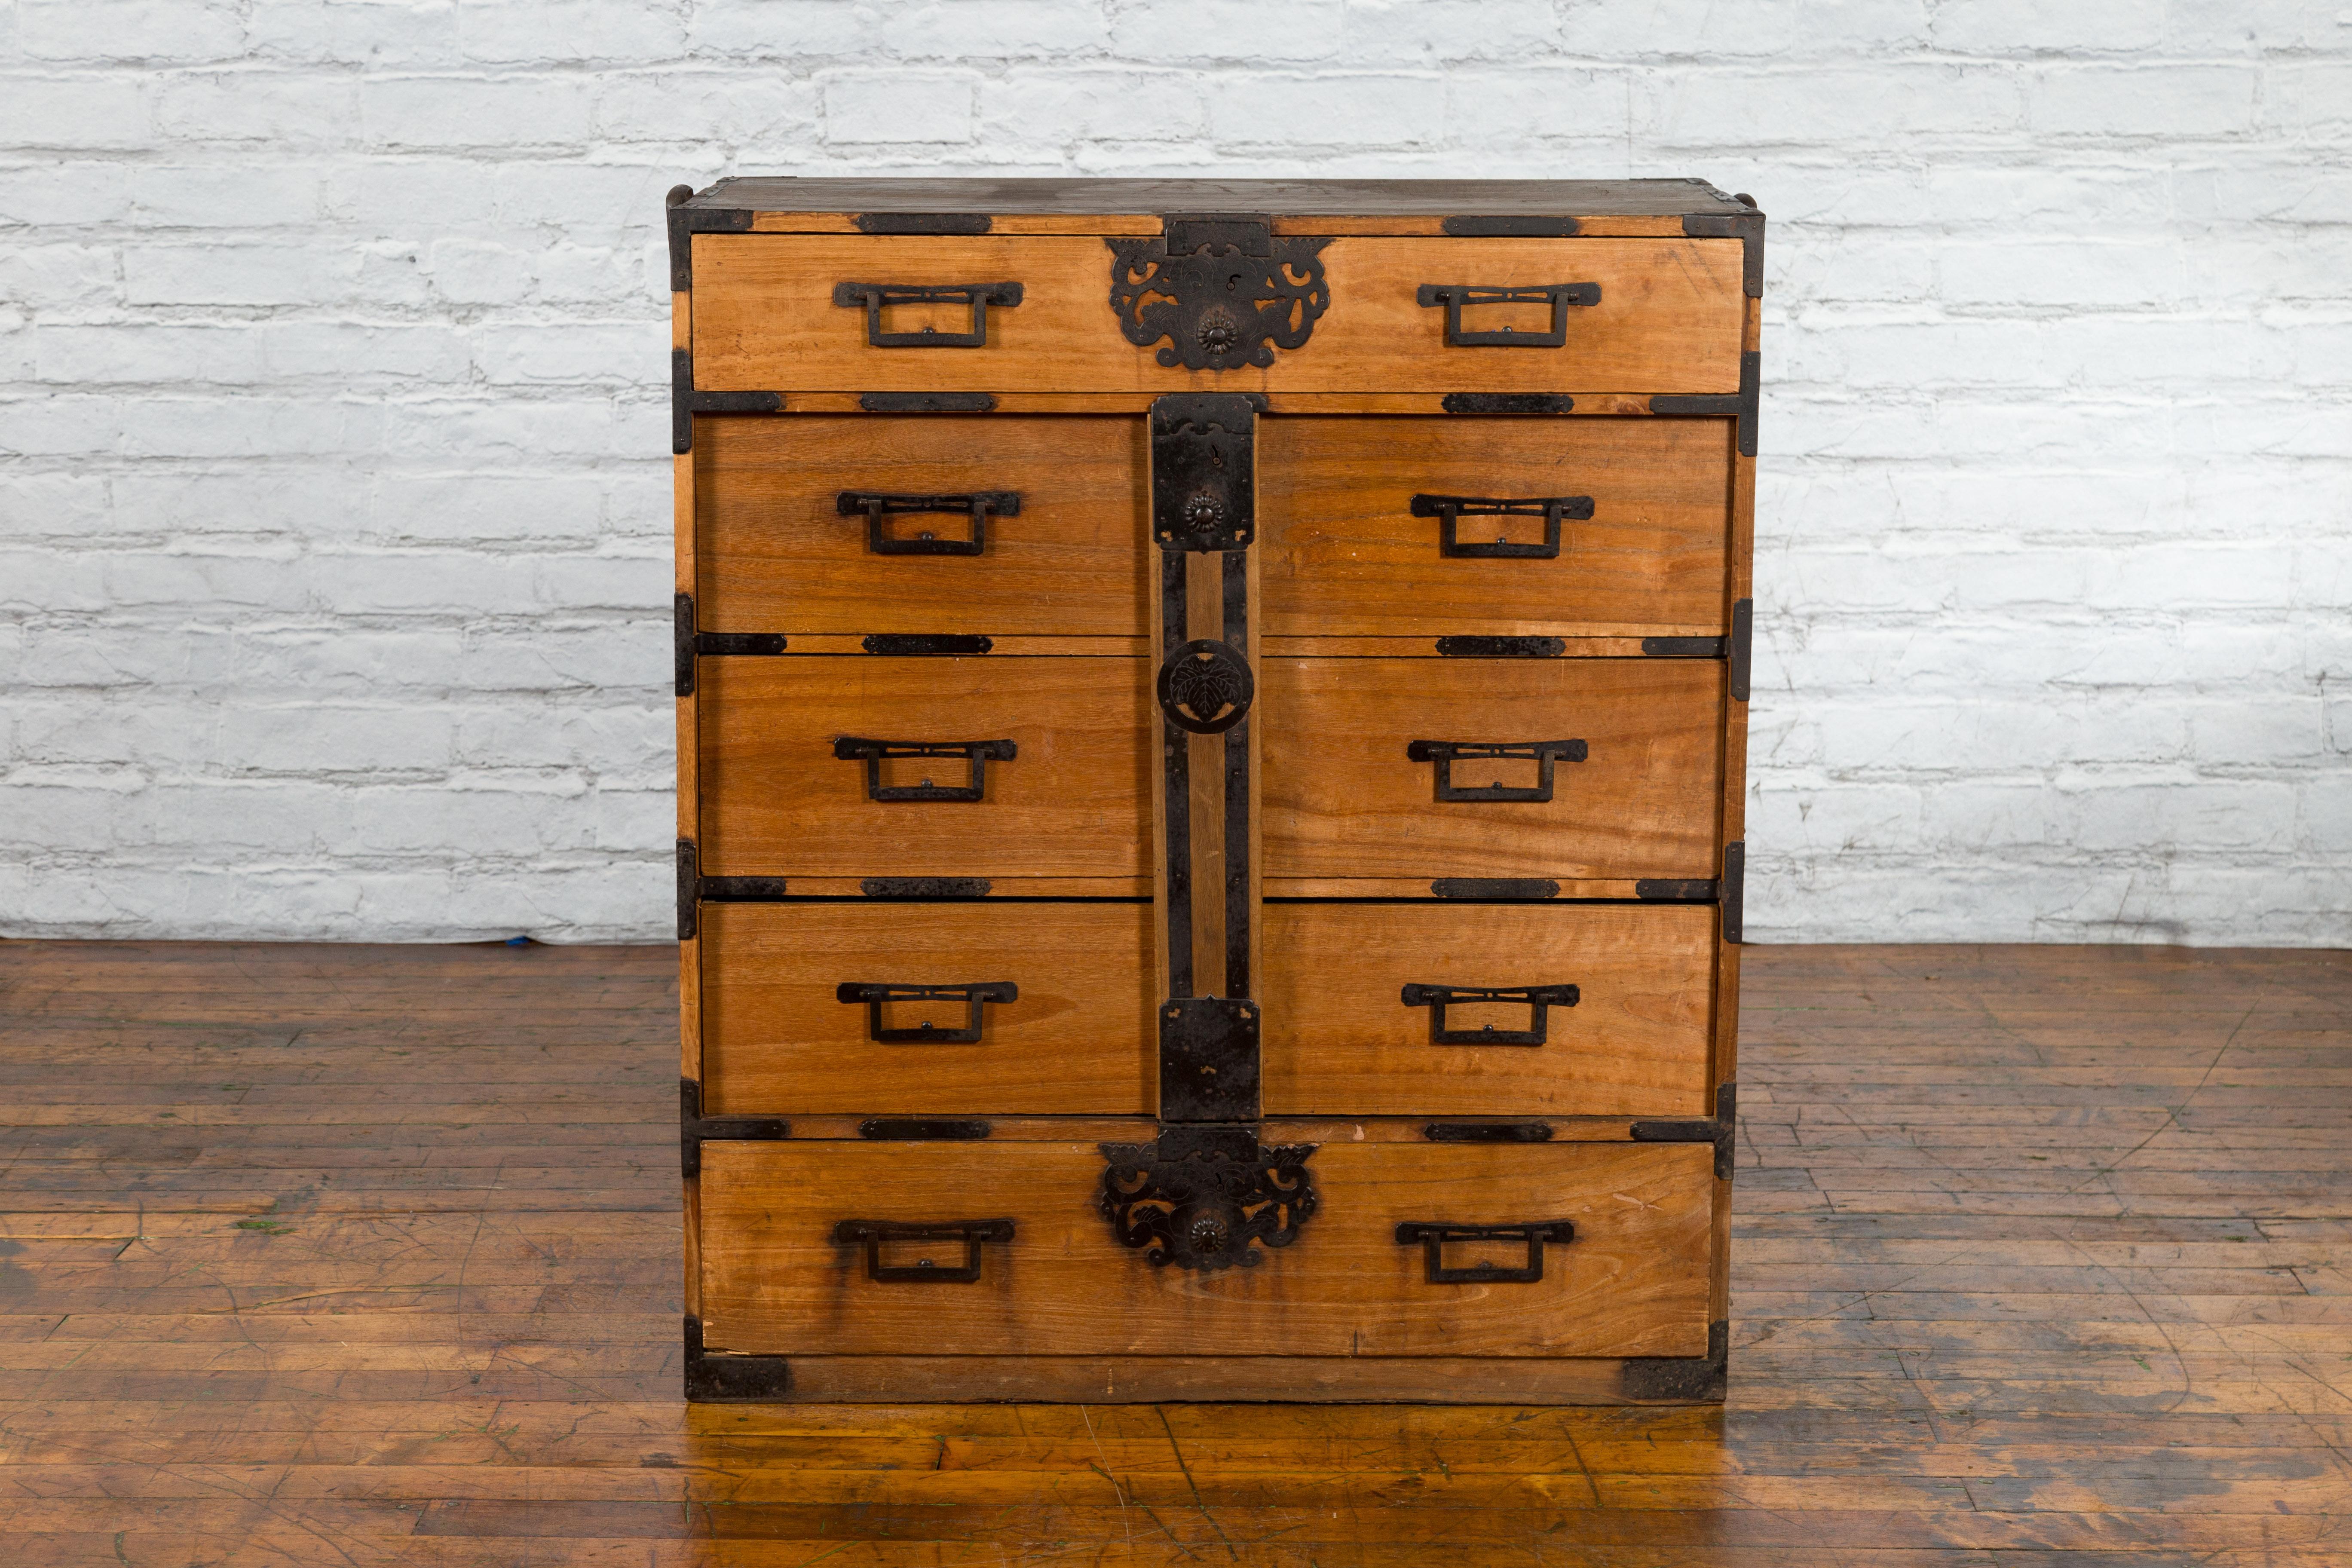 A Japanese Meiji period tansu traveling chest from the 19th century with multiple drawers, and iron hardware. Created in Japan during the Meiji period, this tansu chest captures our attention with its natural wood grain and perfectly organized